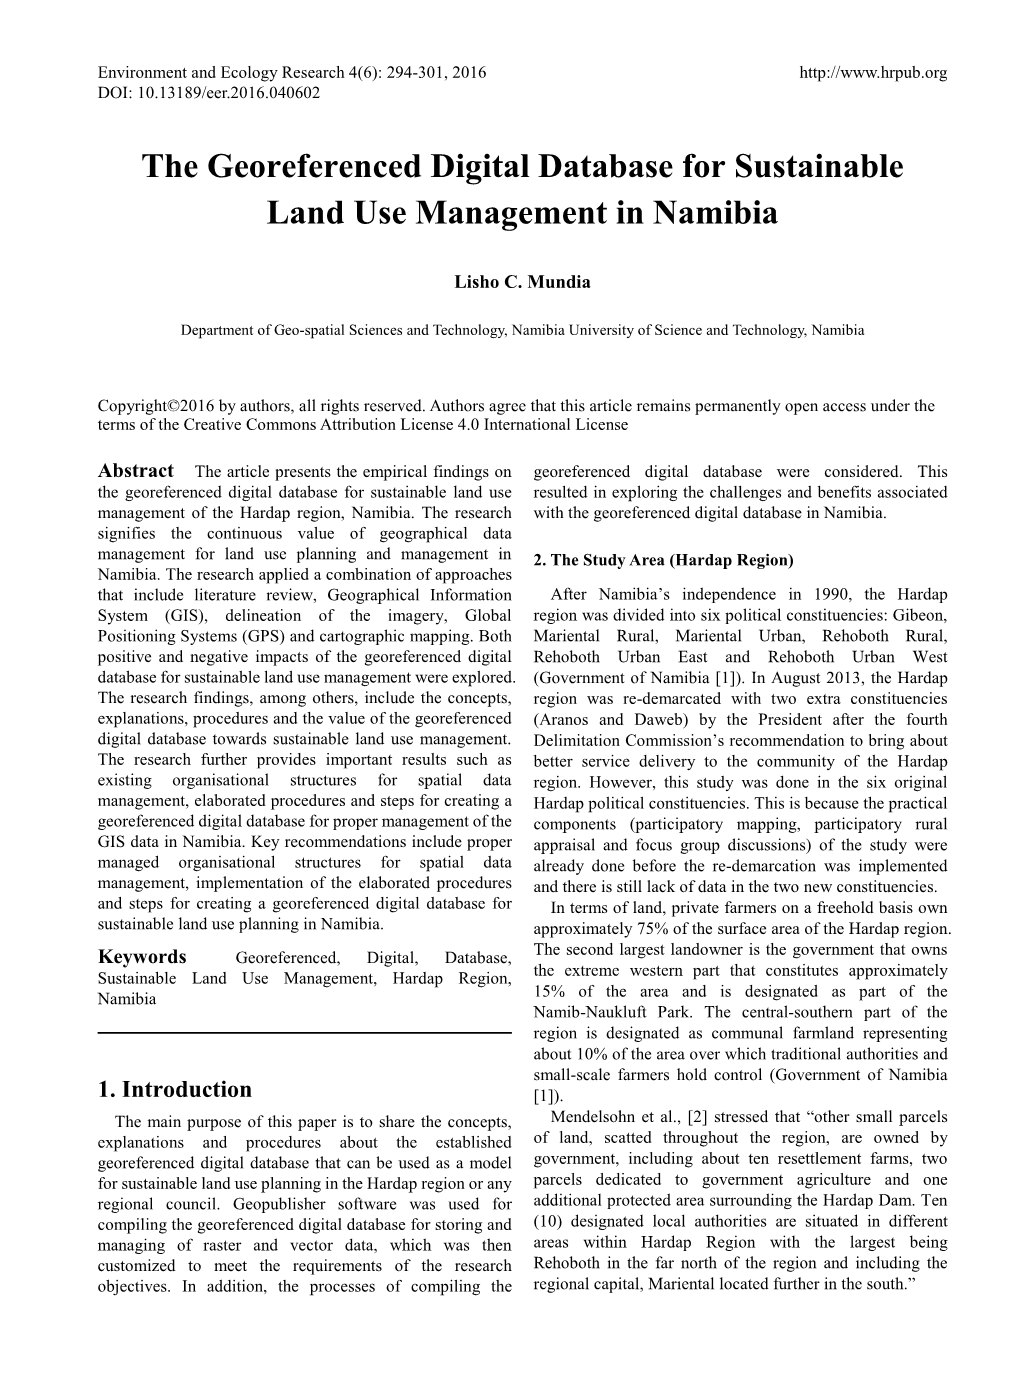 The Georeferenced Digital Database for Sustainable Land Use Management in Namibia